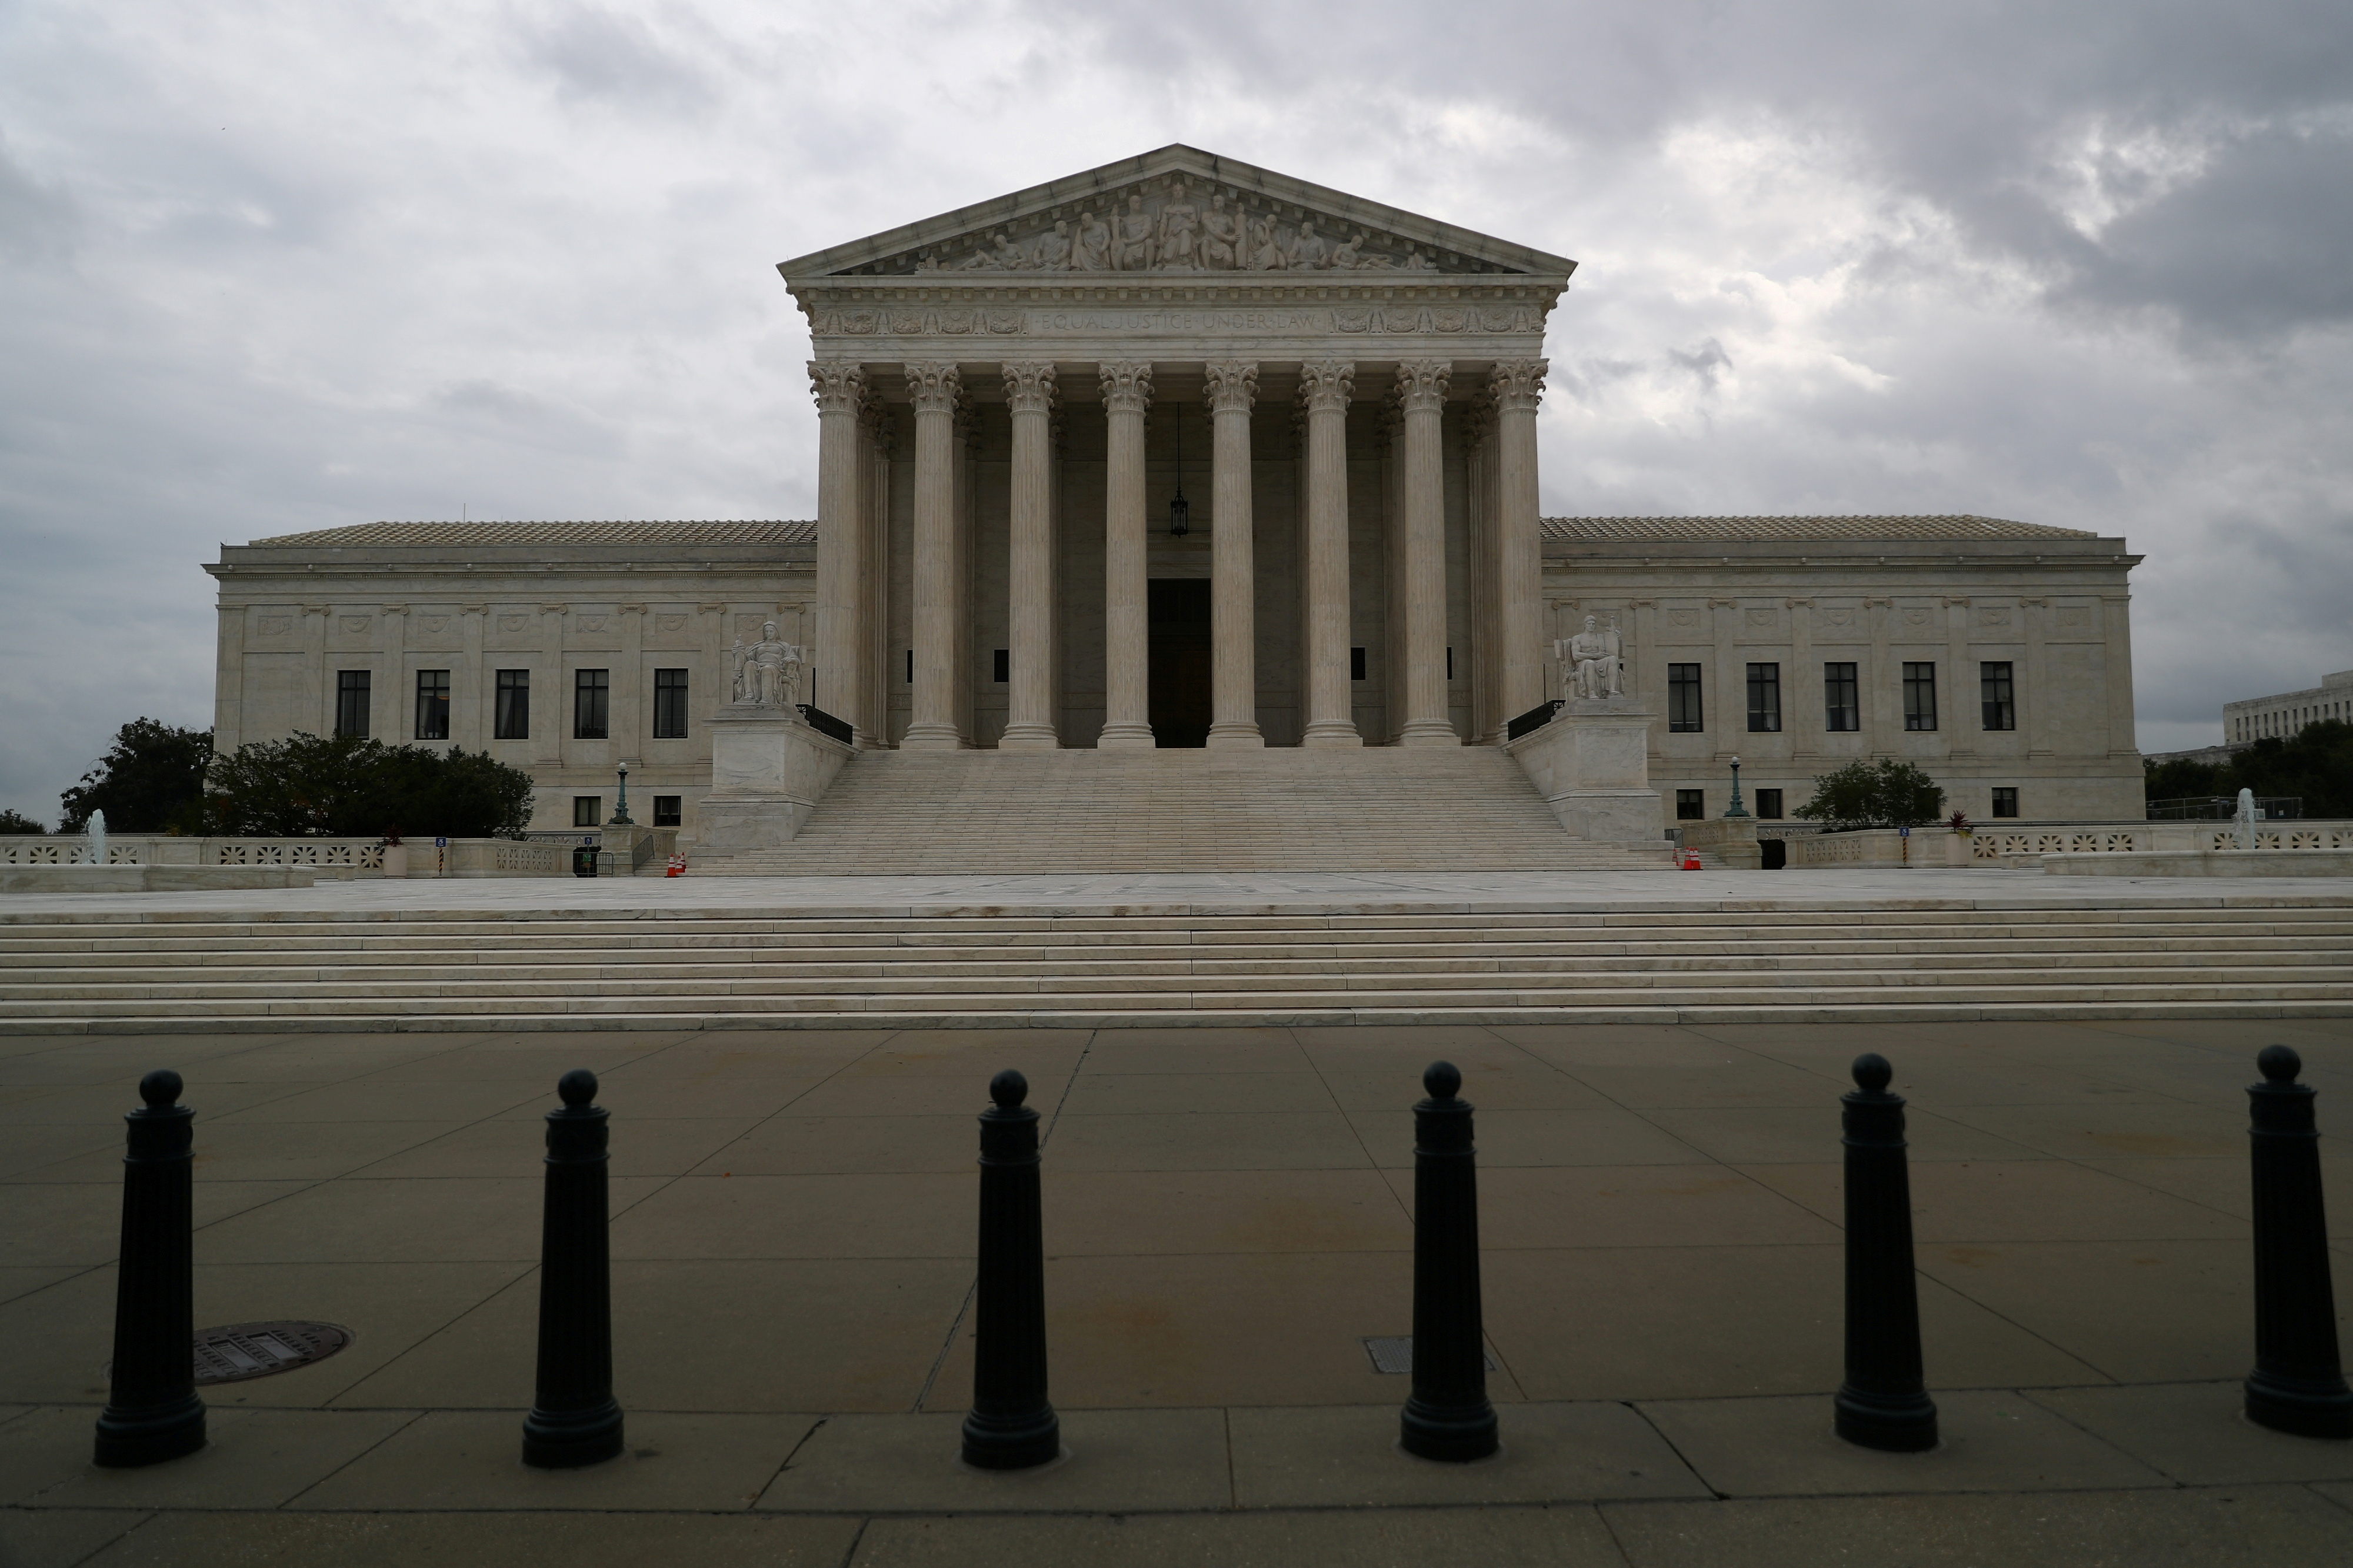 Storm clouds roll in over the U.S. Supreme Court in Washington, U.S., September 1, 2021. REUTERS/Tom Brenner